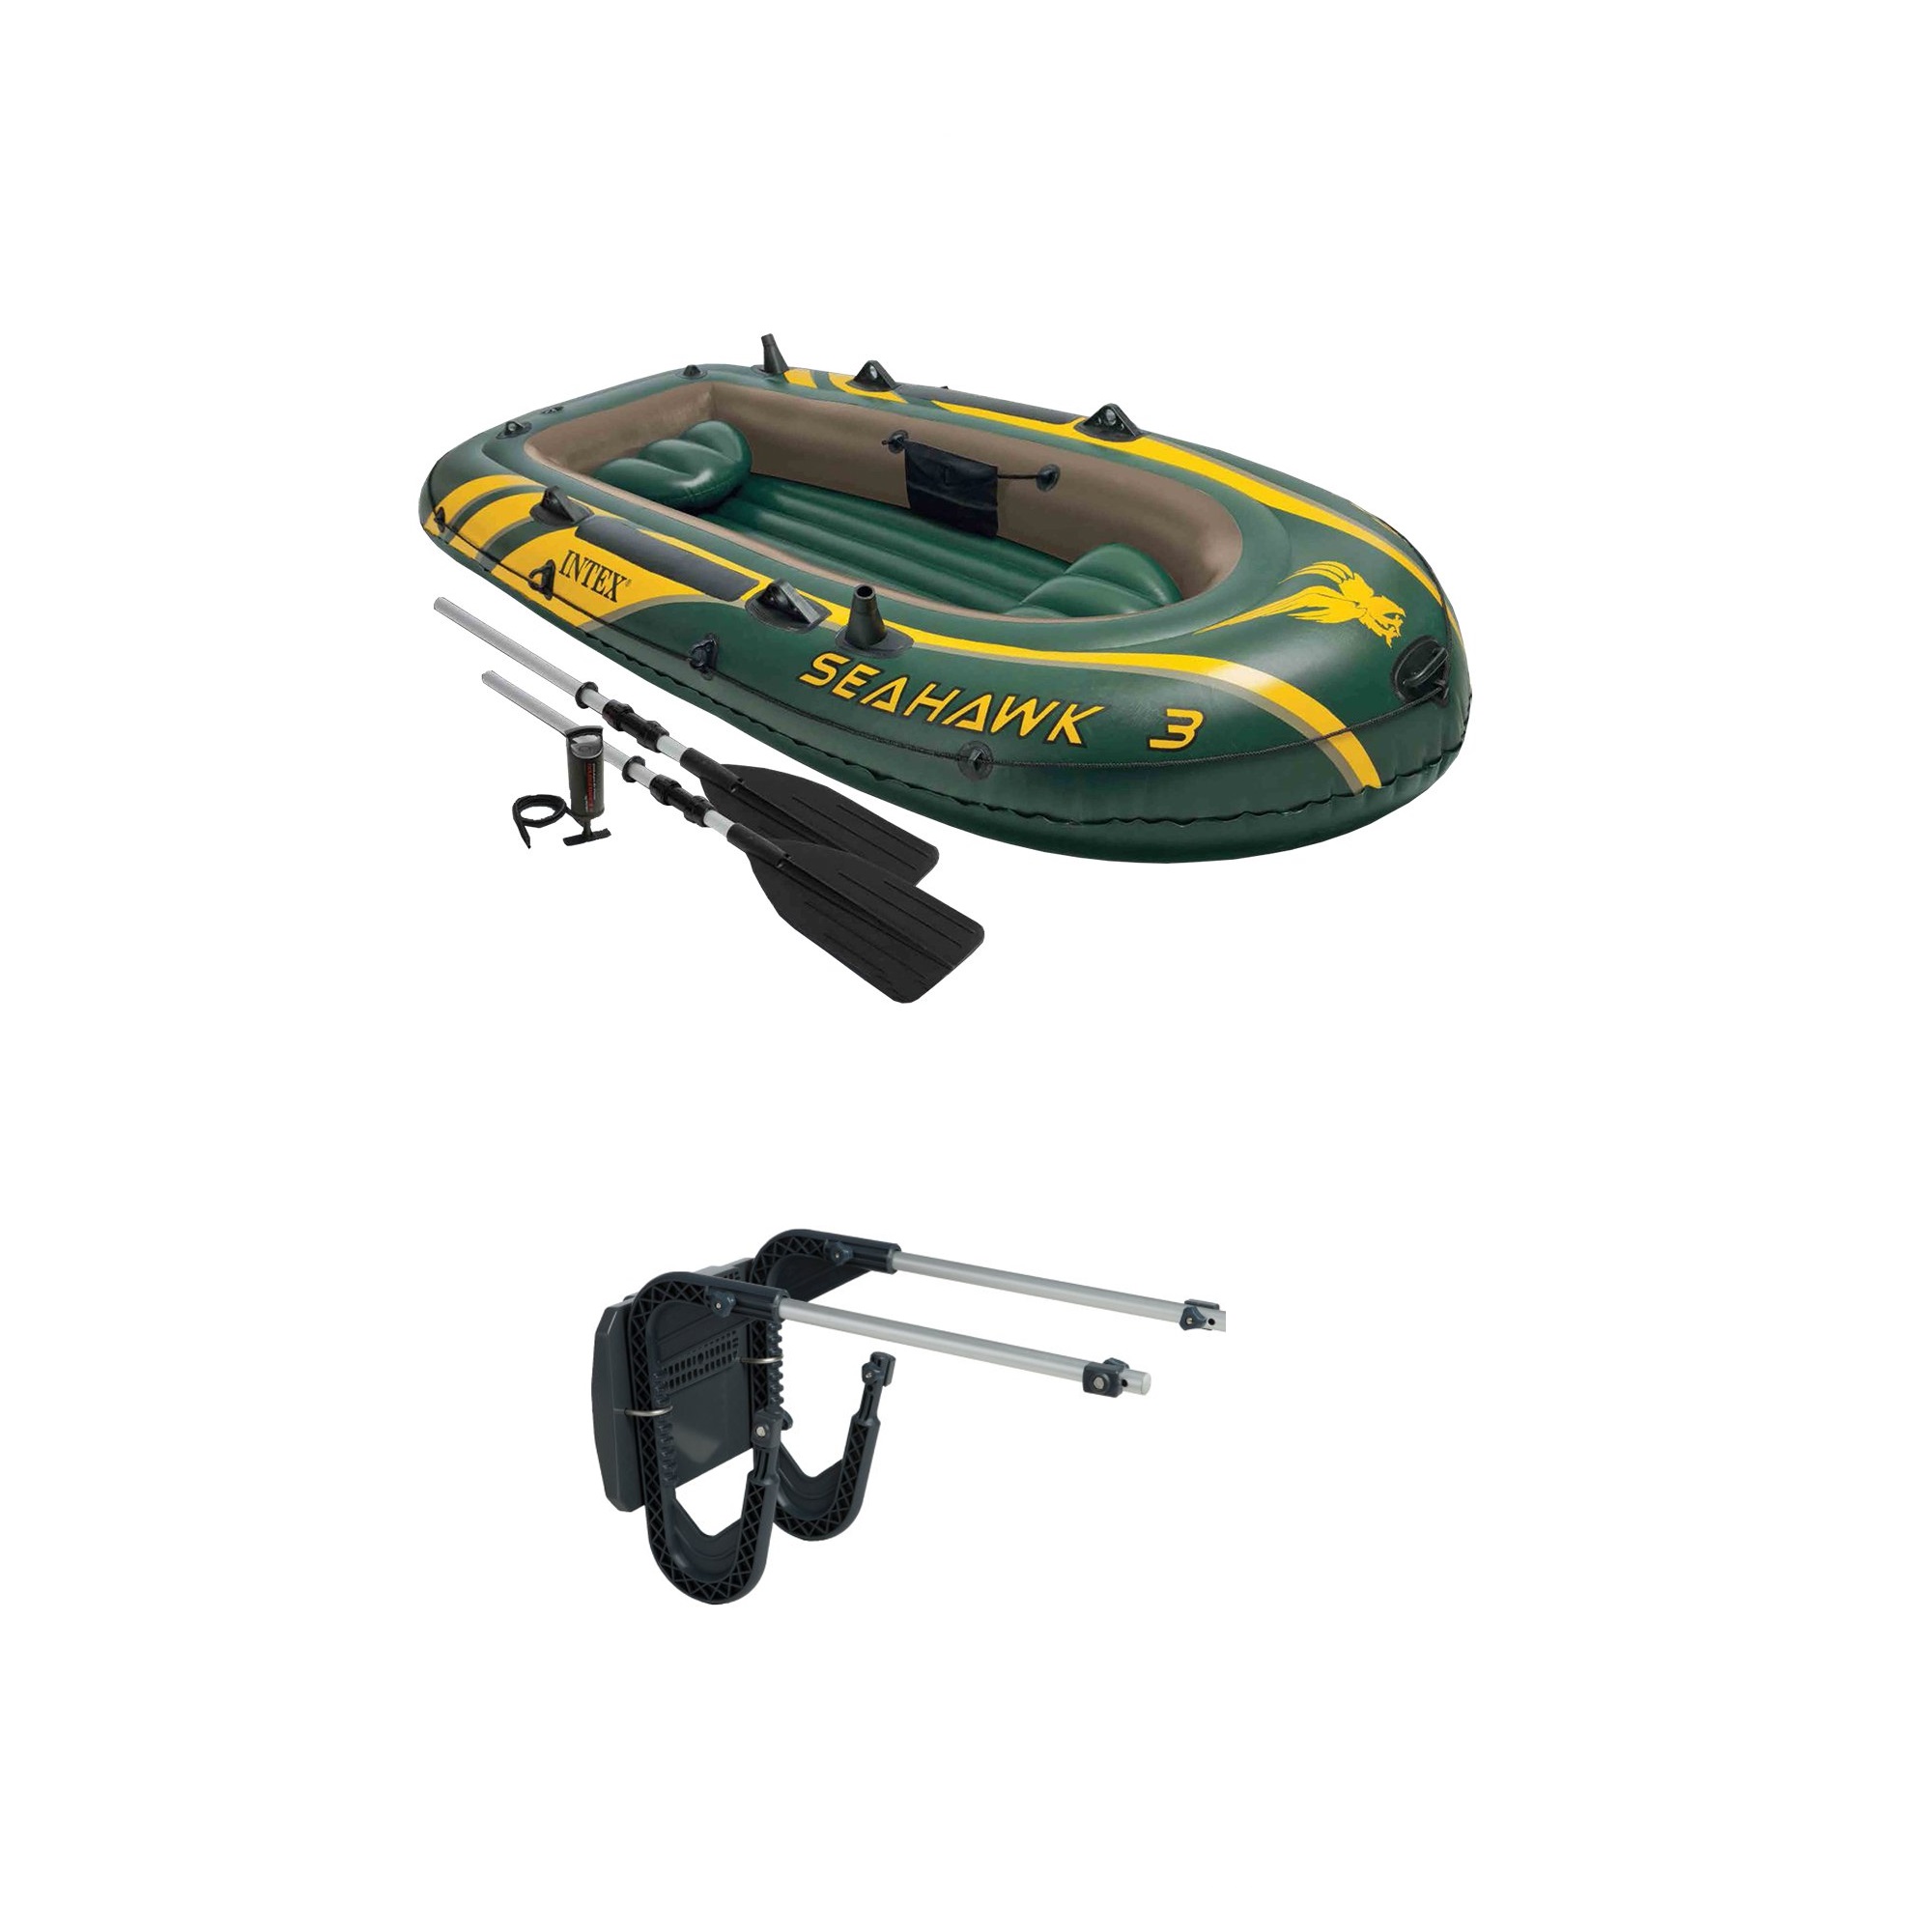 Intex 3 Person Boat Set w/ Aluminum Oars & Pump and Composite Boat Motor Mount - Click1Get2 Hot Best Offers